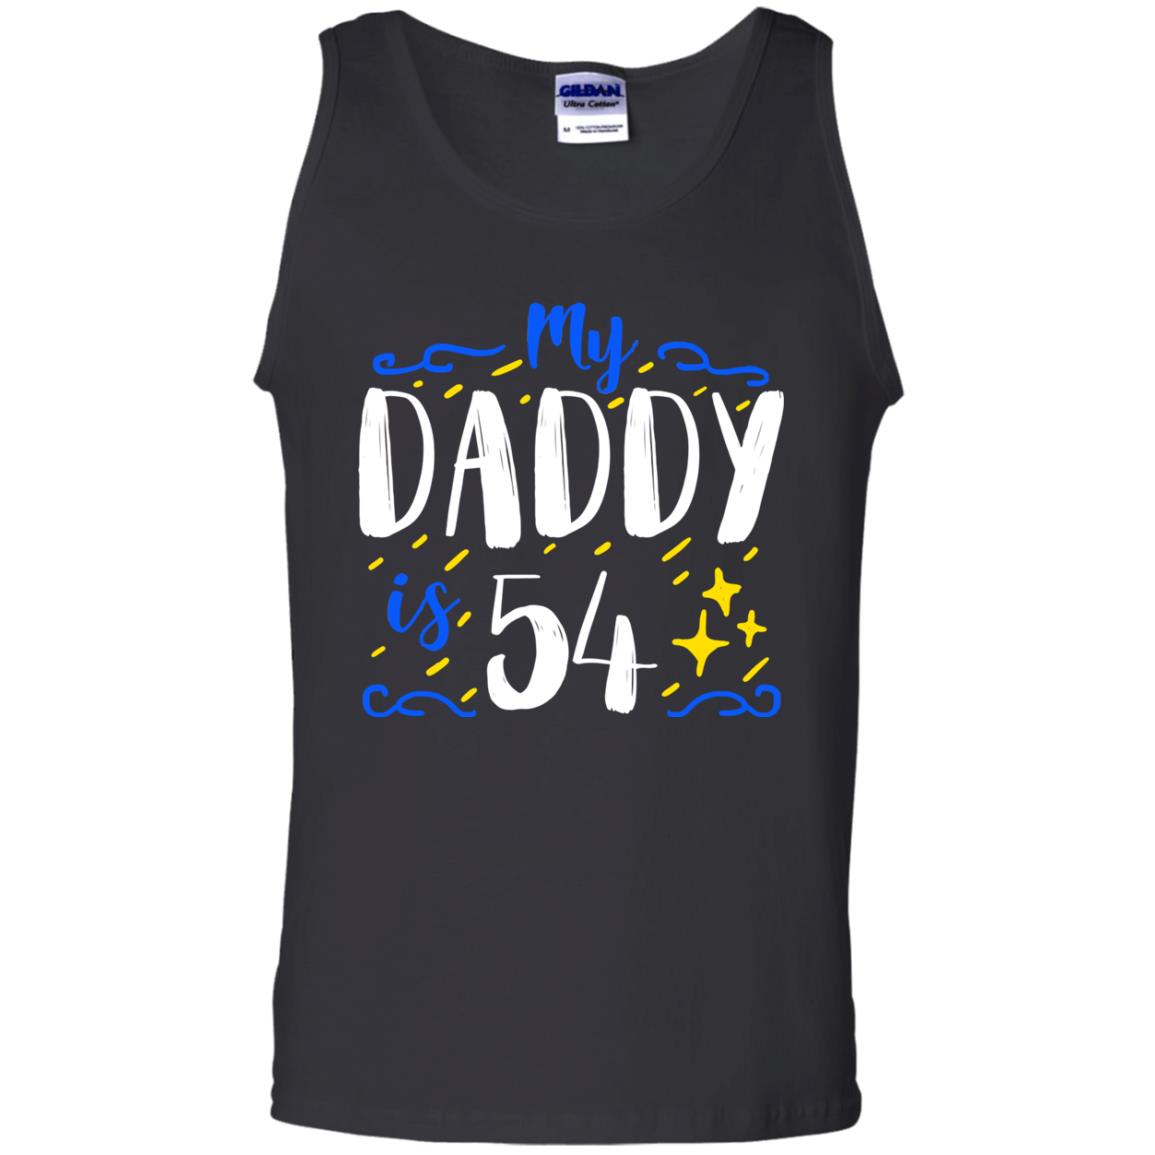 My Daddy Is 54 54th Birthday Daddy Shirt For Sons Or DaughtersG220 Gildan 100% Cotton Tank Top